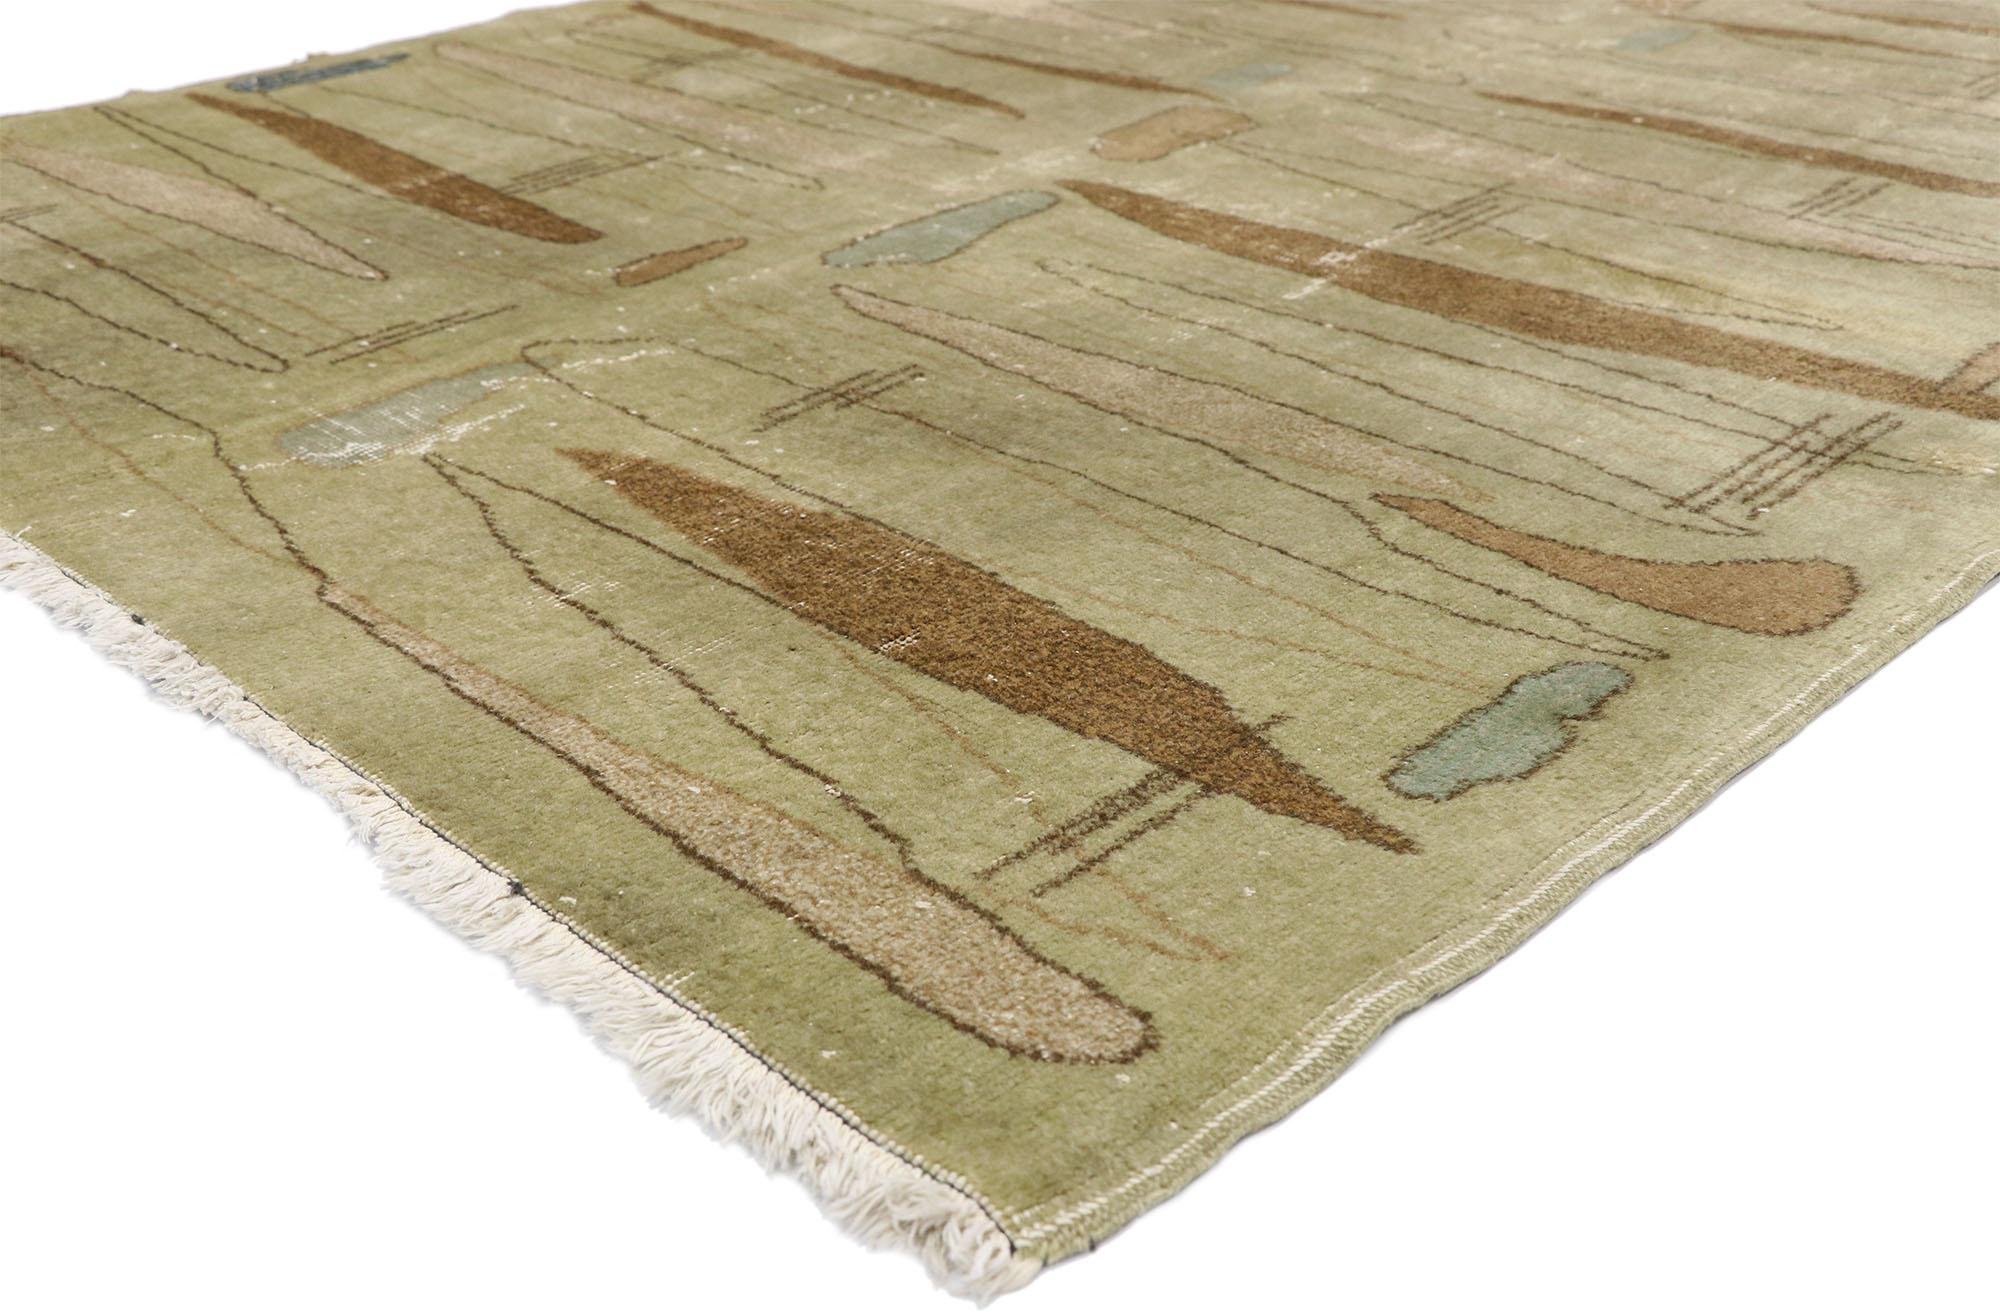 52582 Zeki Muren distressed vintage Turkish Sivas rug with Art Deco Bauhaus style. Decidedly modern and retro in feel, this hand-knotted wool distressed vintage Turkish Sivas rug displays all the intrigue of Bauhaus design. Softly outlined elongated